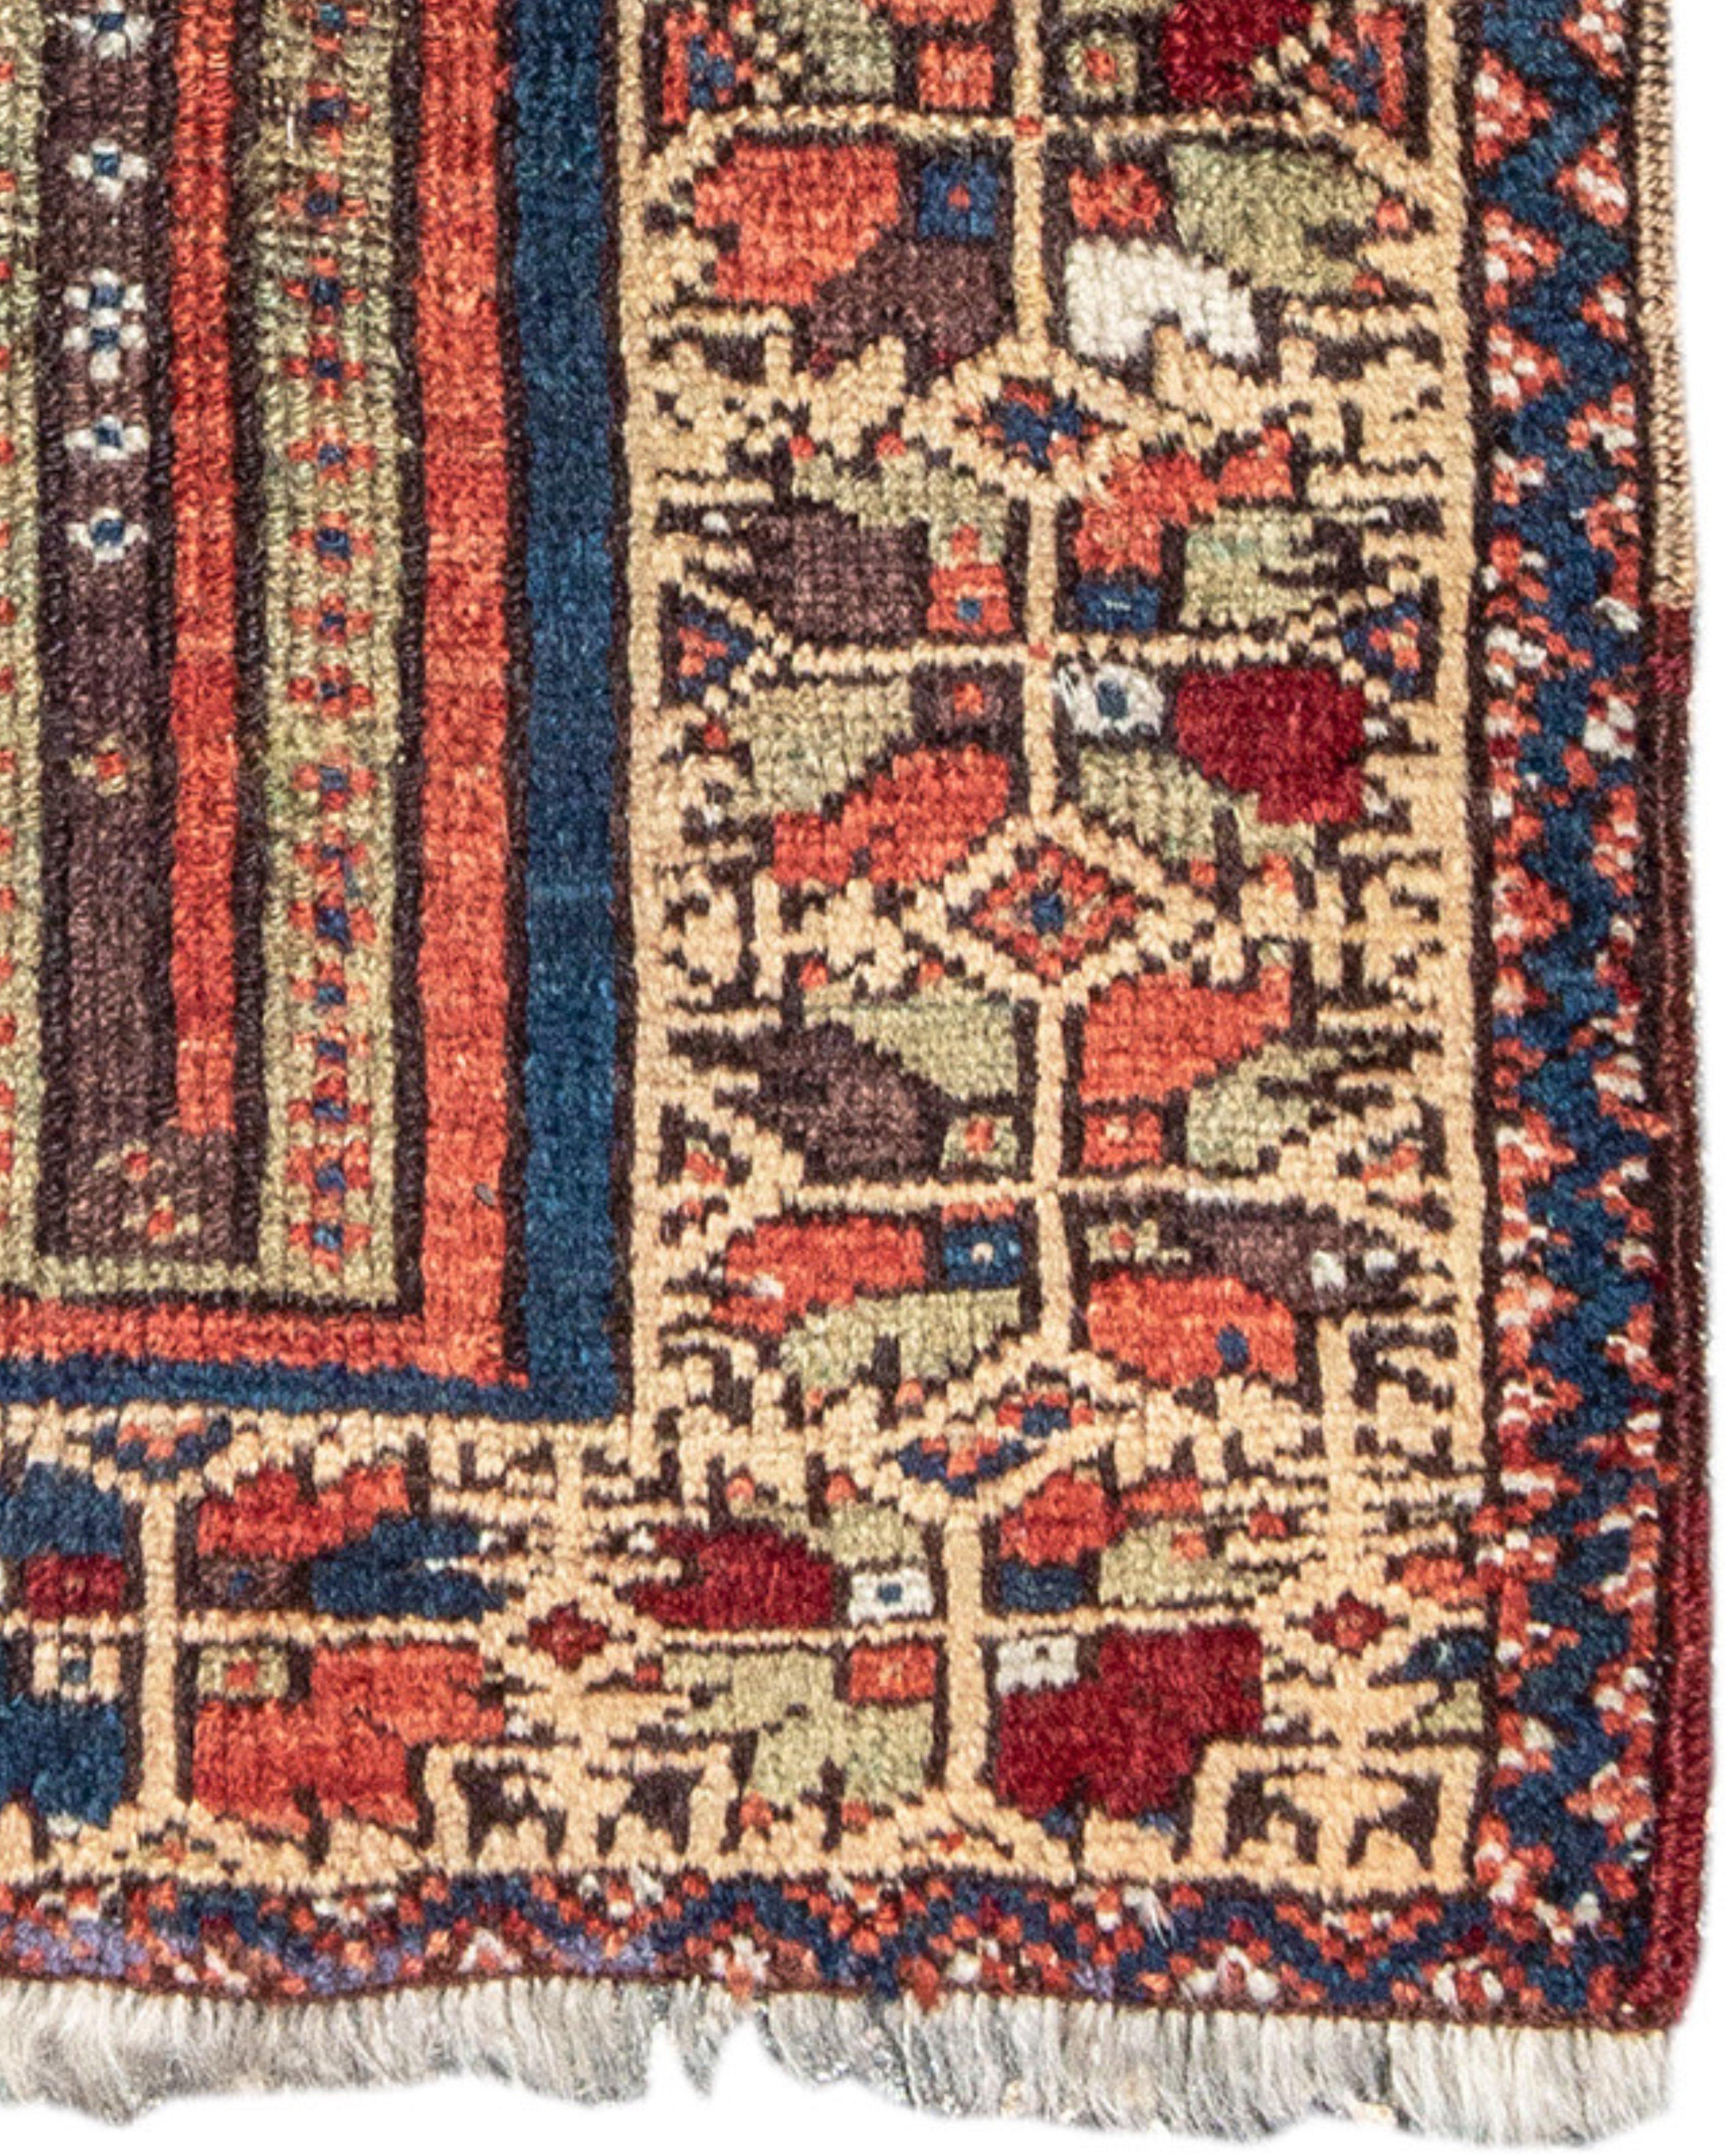 Mudjur Yastic Rug, 19th century In Excellent Condition For Sale In San Francisco, CA